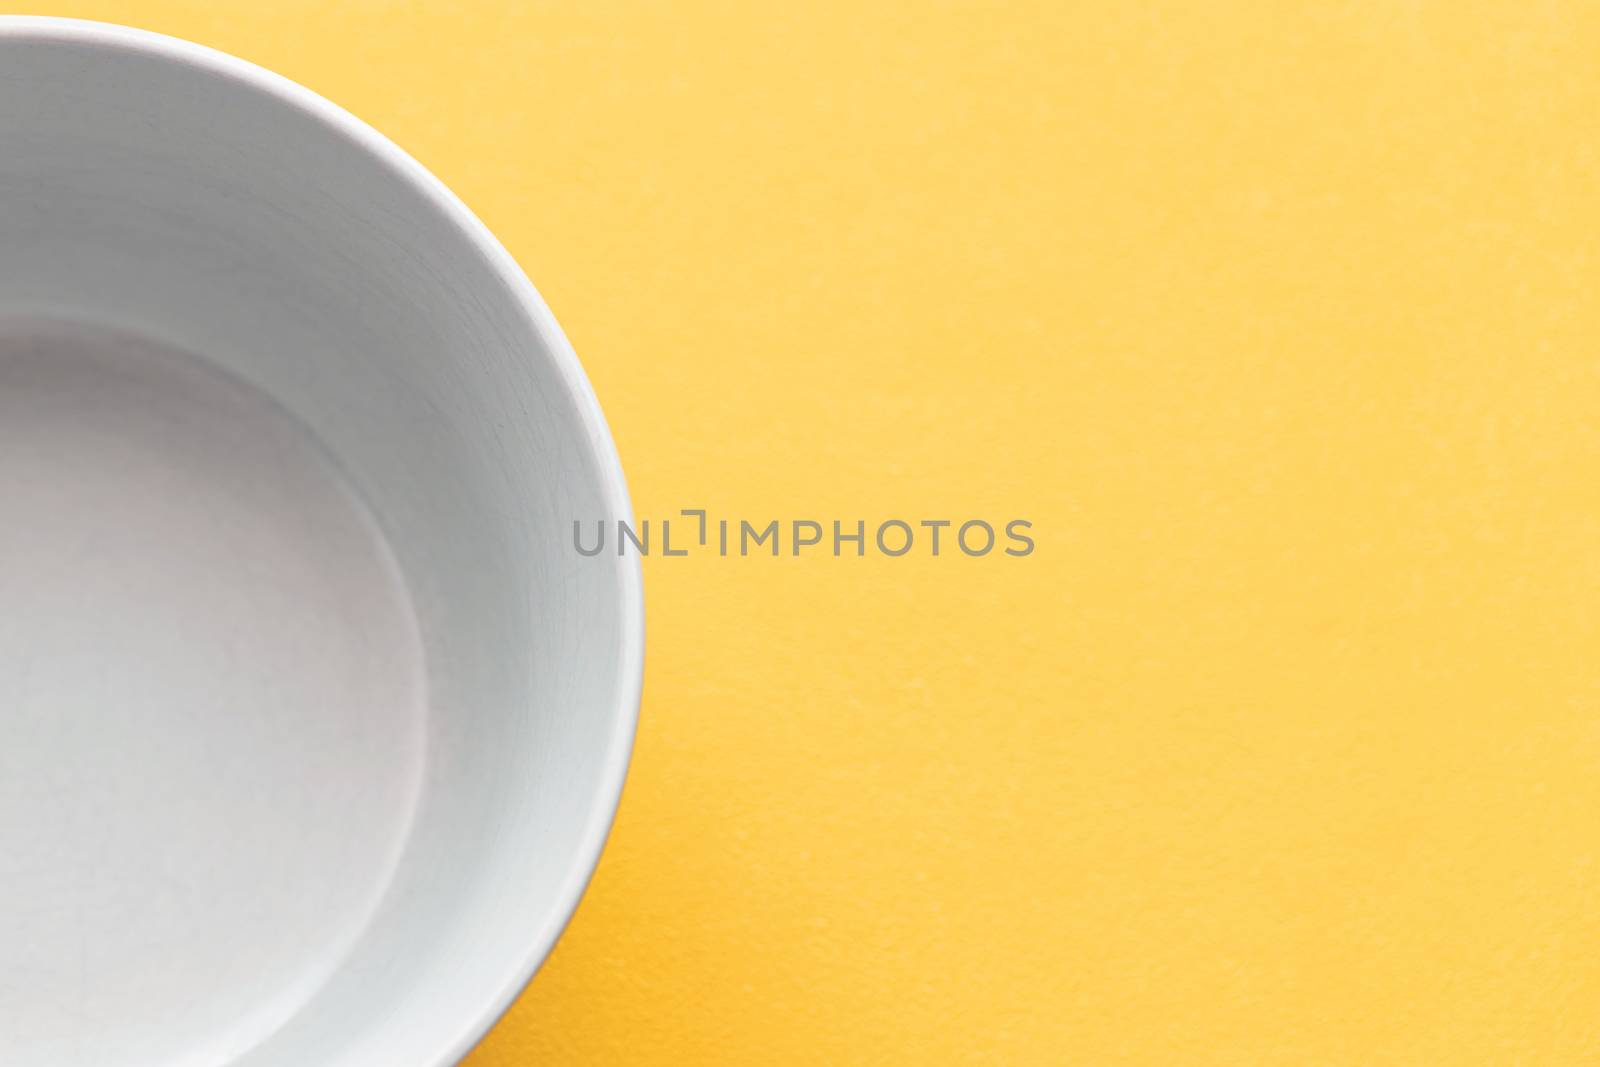 Empty white Cup on a yellow background by bonilook